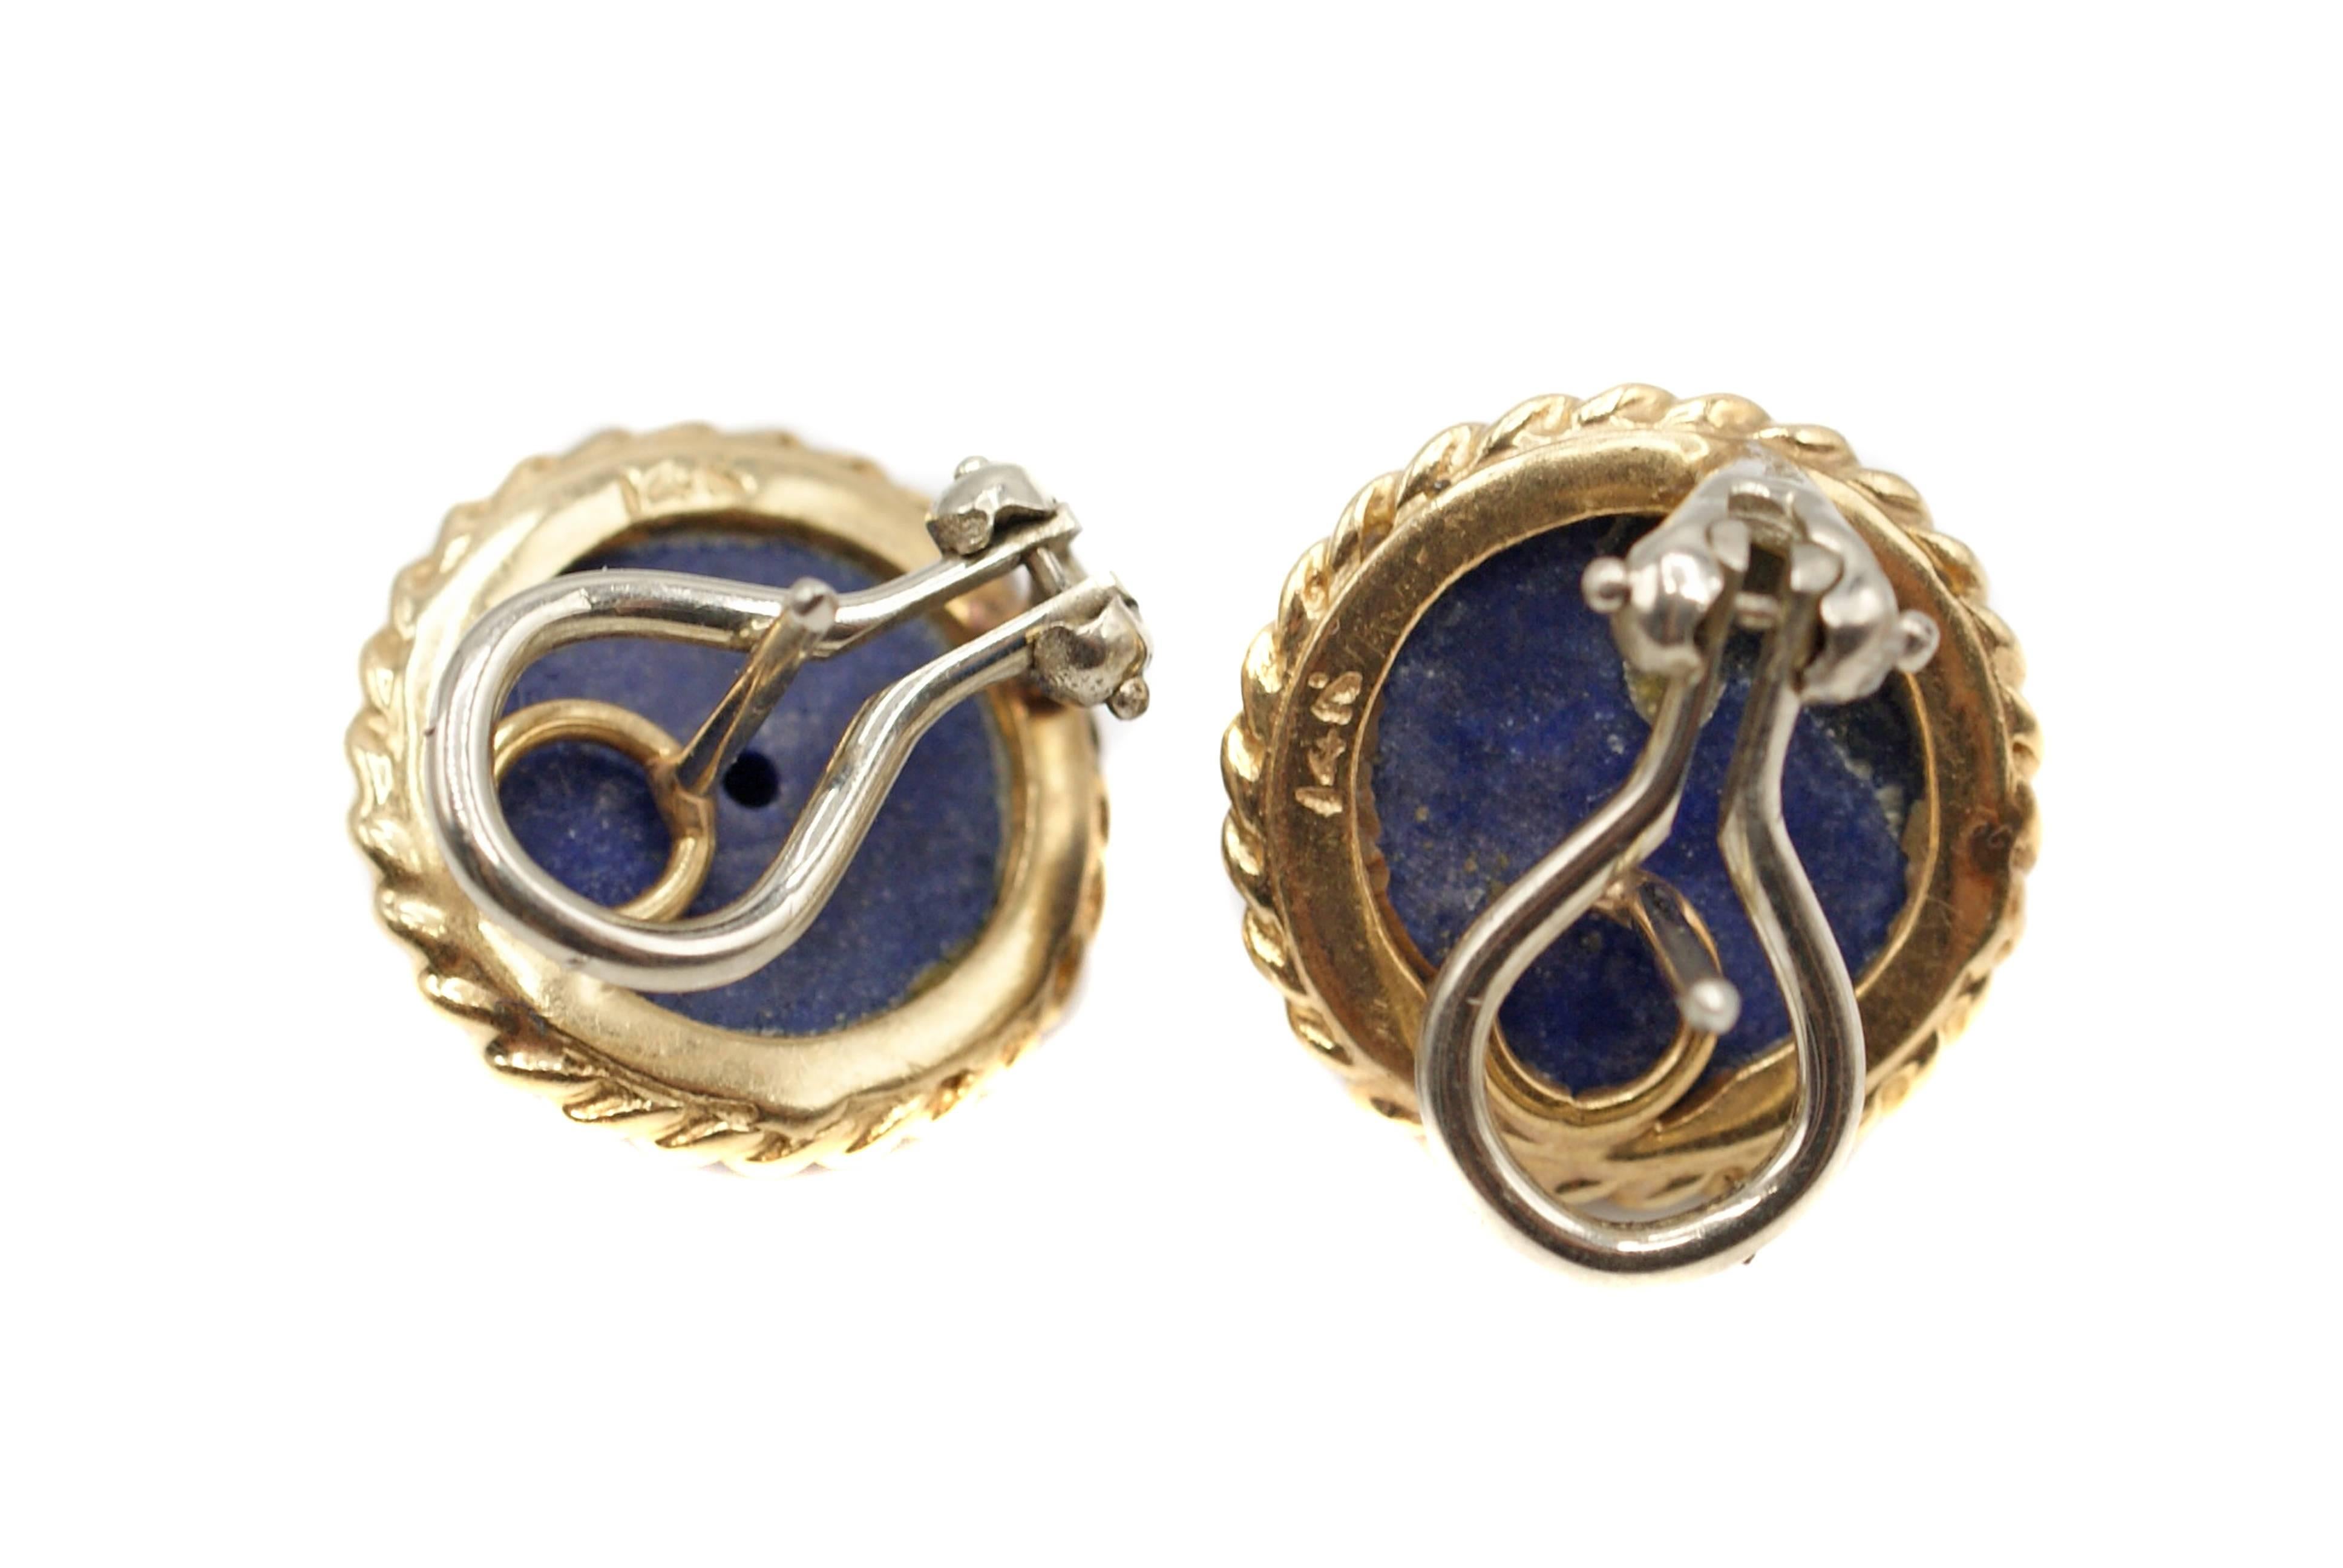 These beautiful royal blue lapis lazuli ear clips are perfectly matched in shape in color. Lapis of this fine quality has usually been mined in Afghanistan and has been cherished for its amazing blue for centuries. Measuring 13 millimeters or